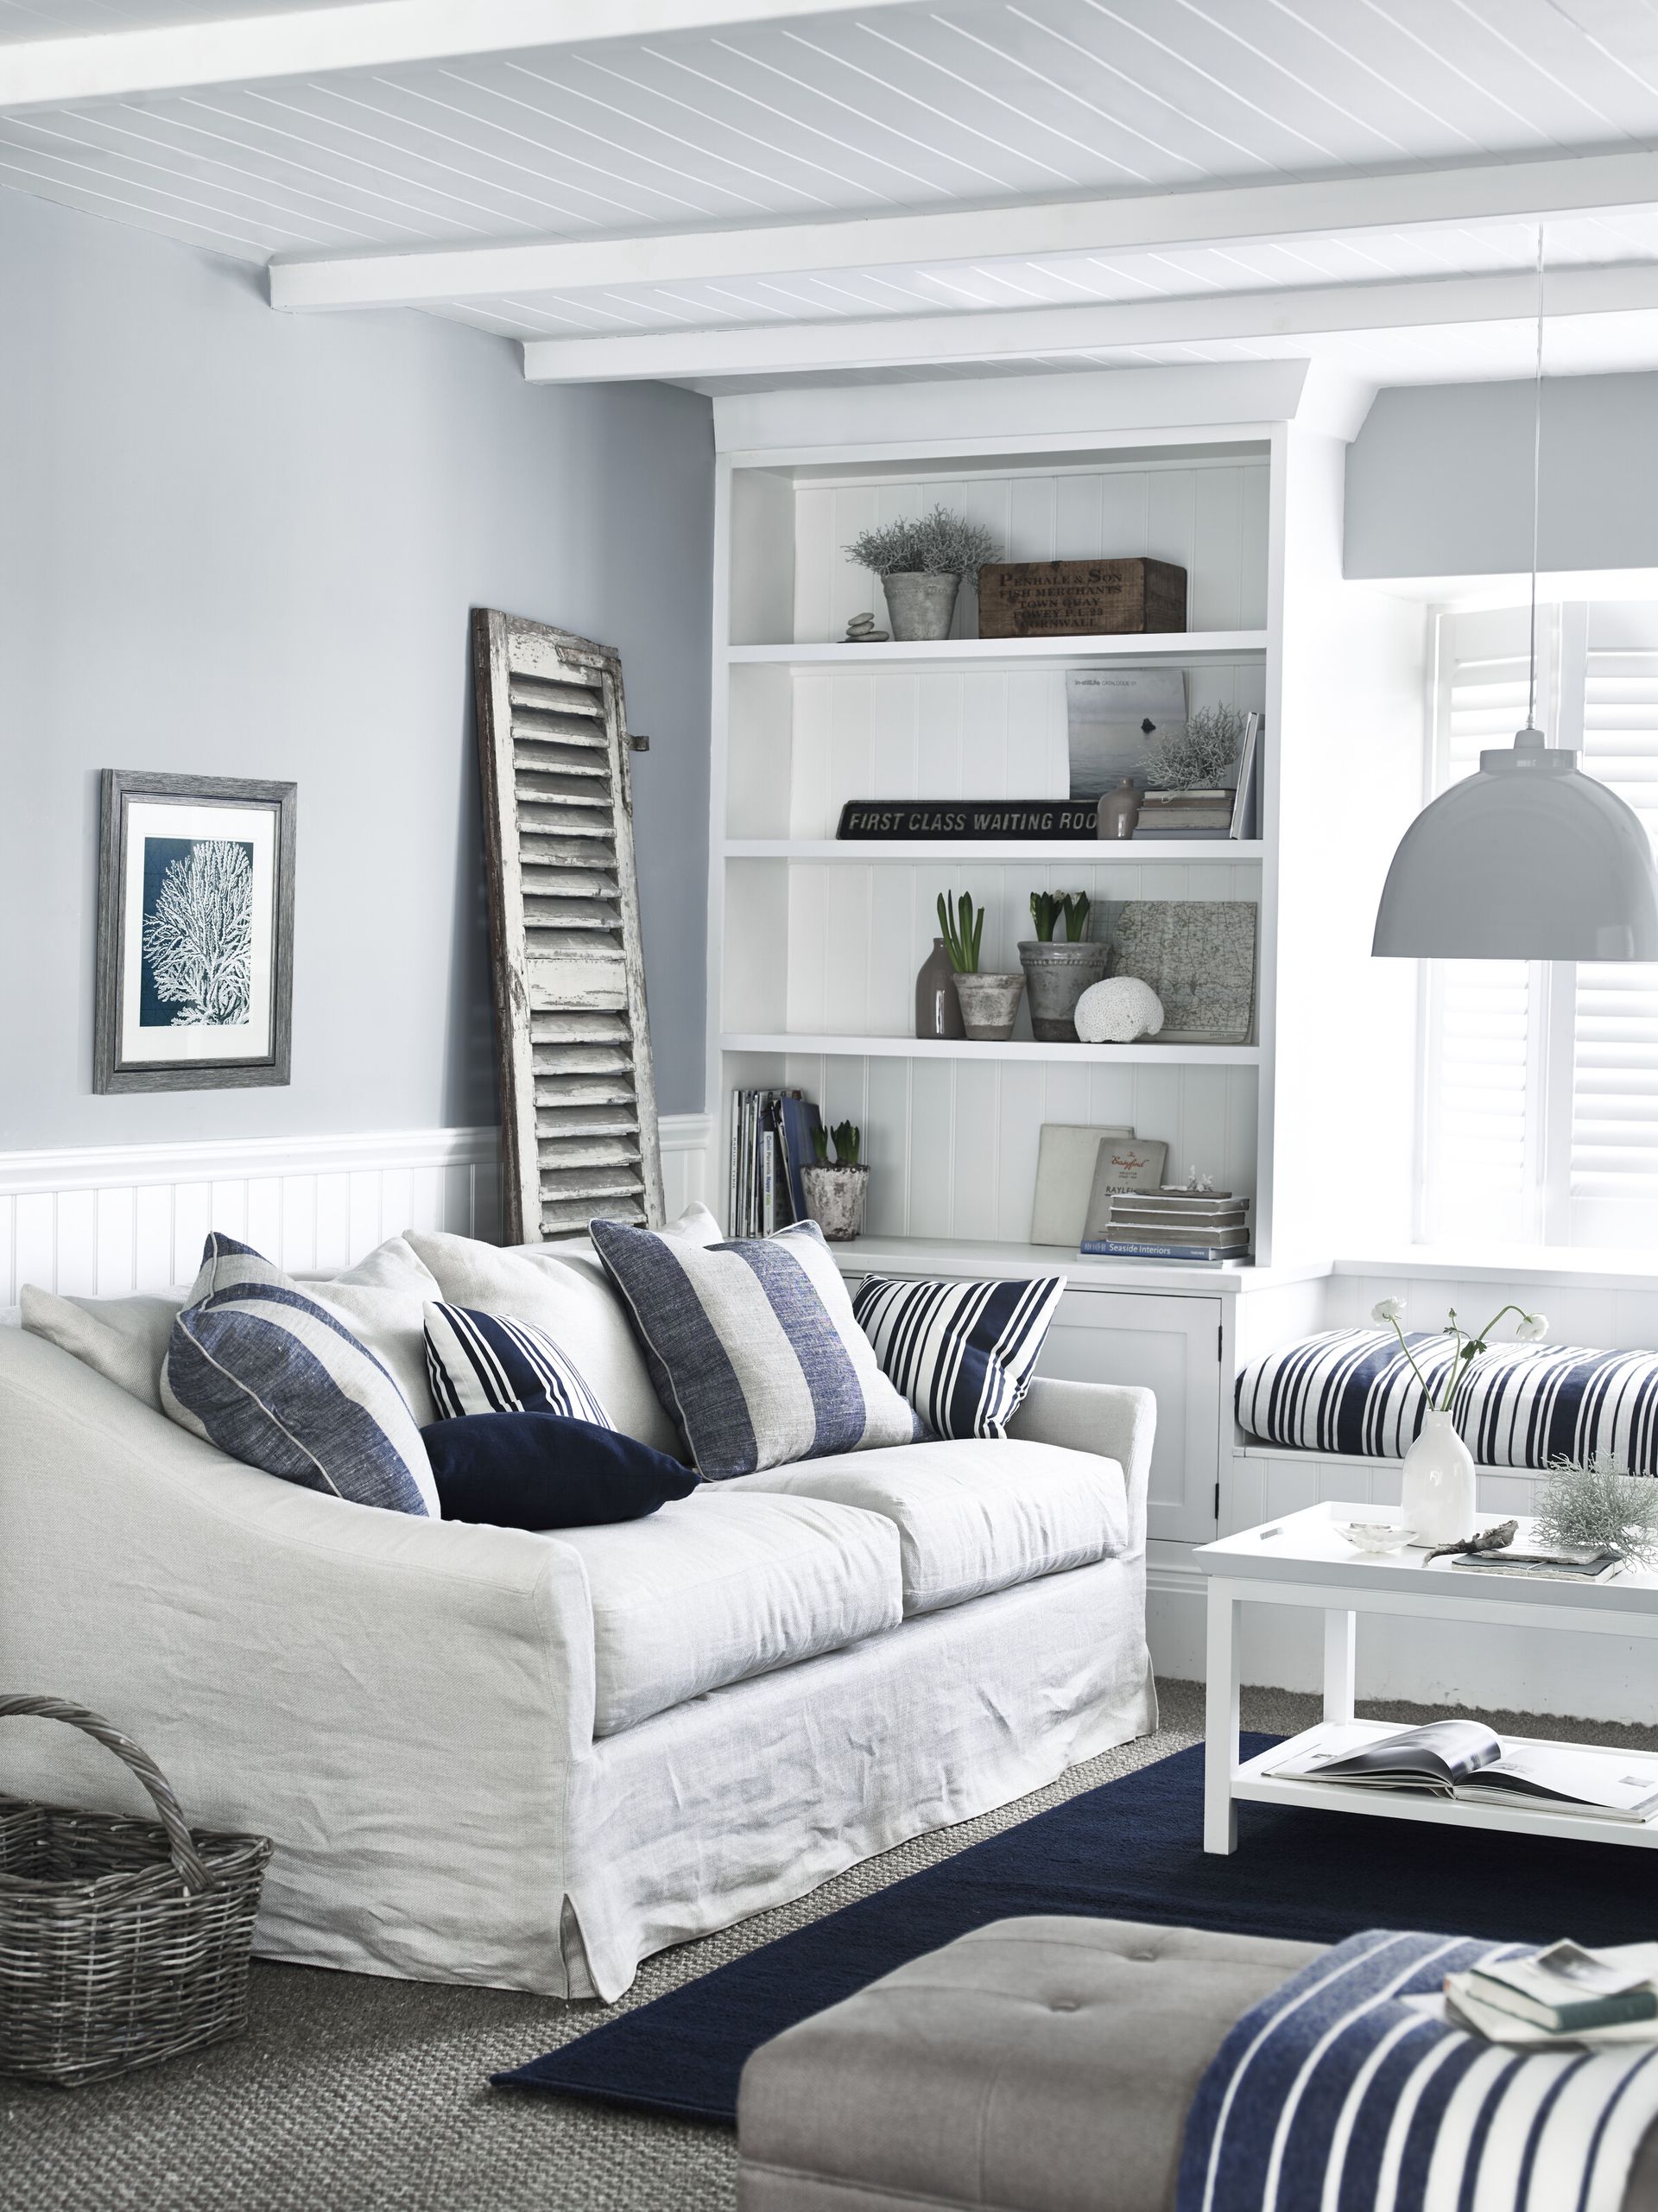 10 alcove shelf ideas – chic design options and styling strategies